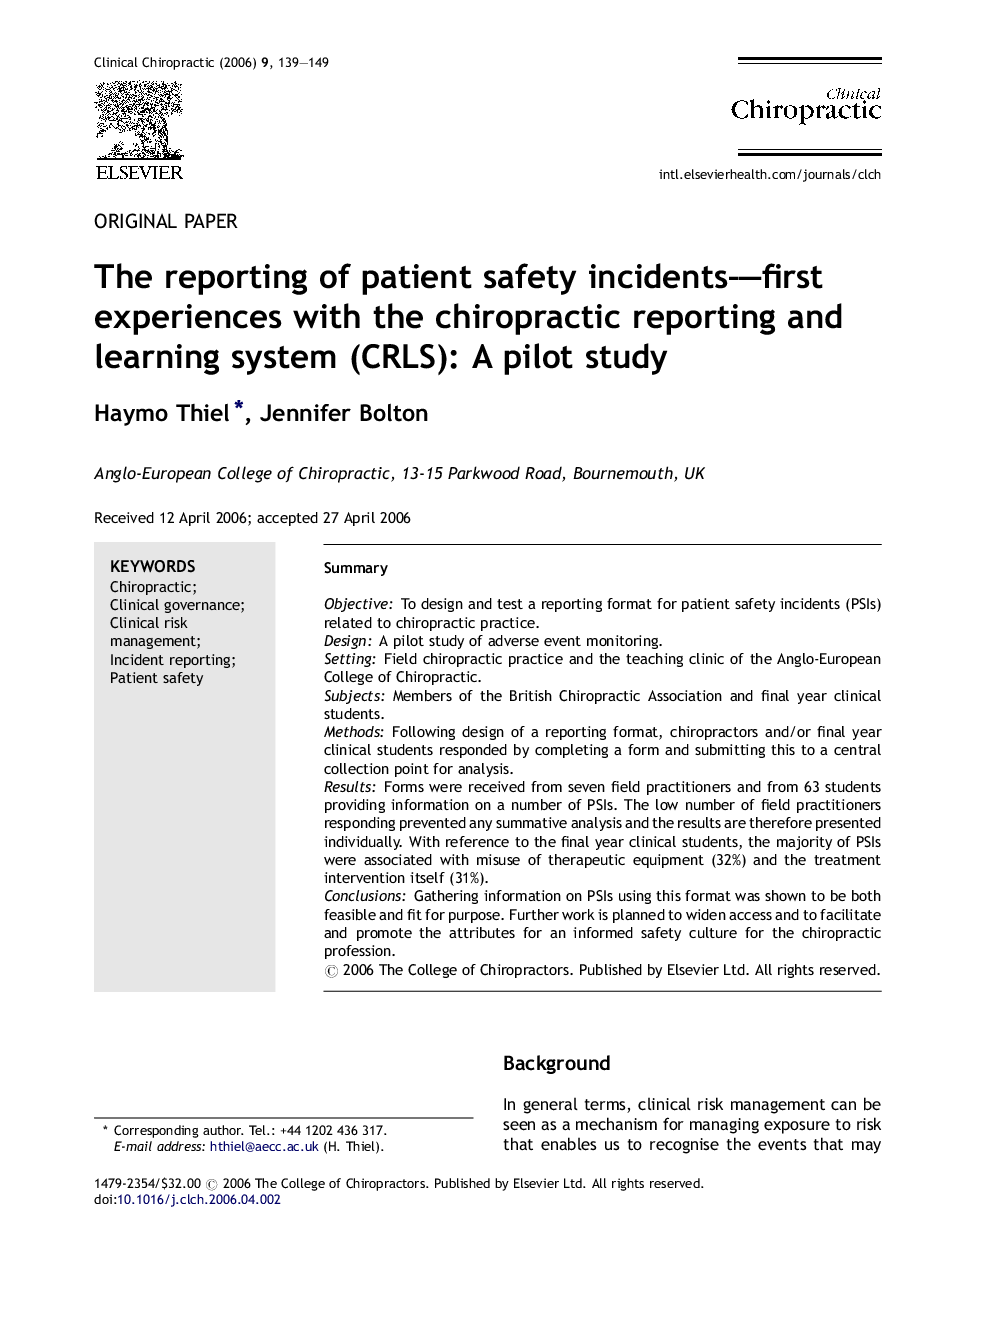 The reporting of patient safety incidents-first experiences with the chiropractic reporting and learning system (CRLS): A pilot study